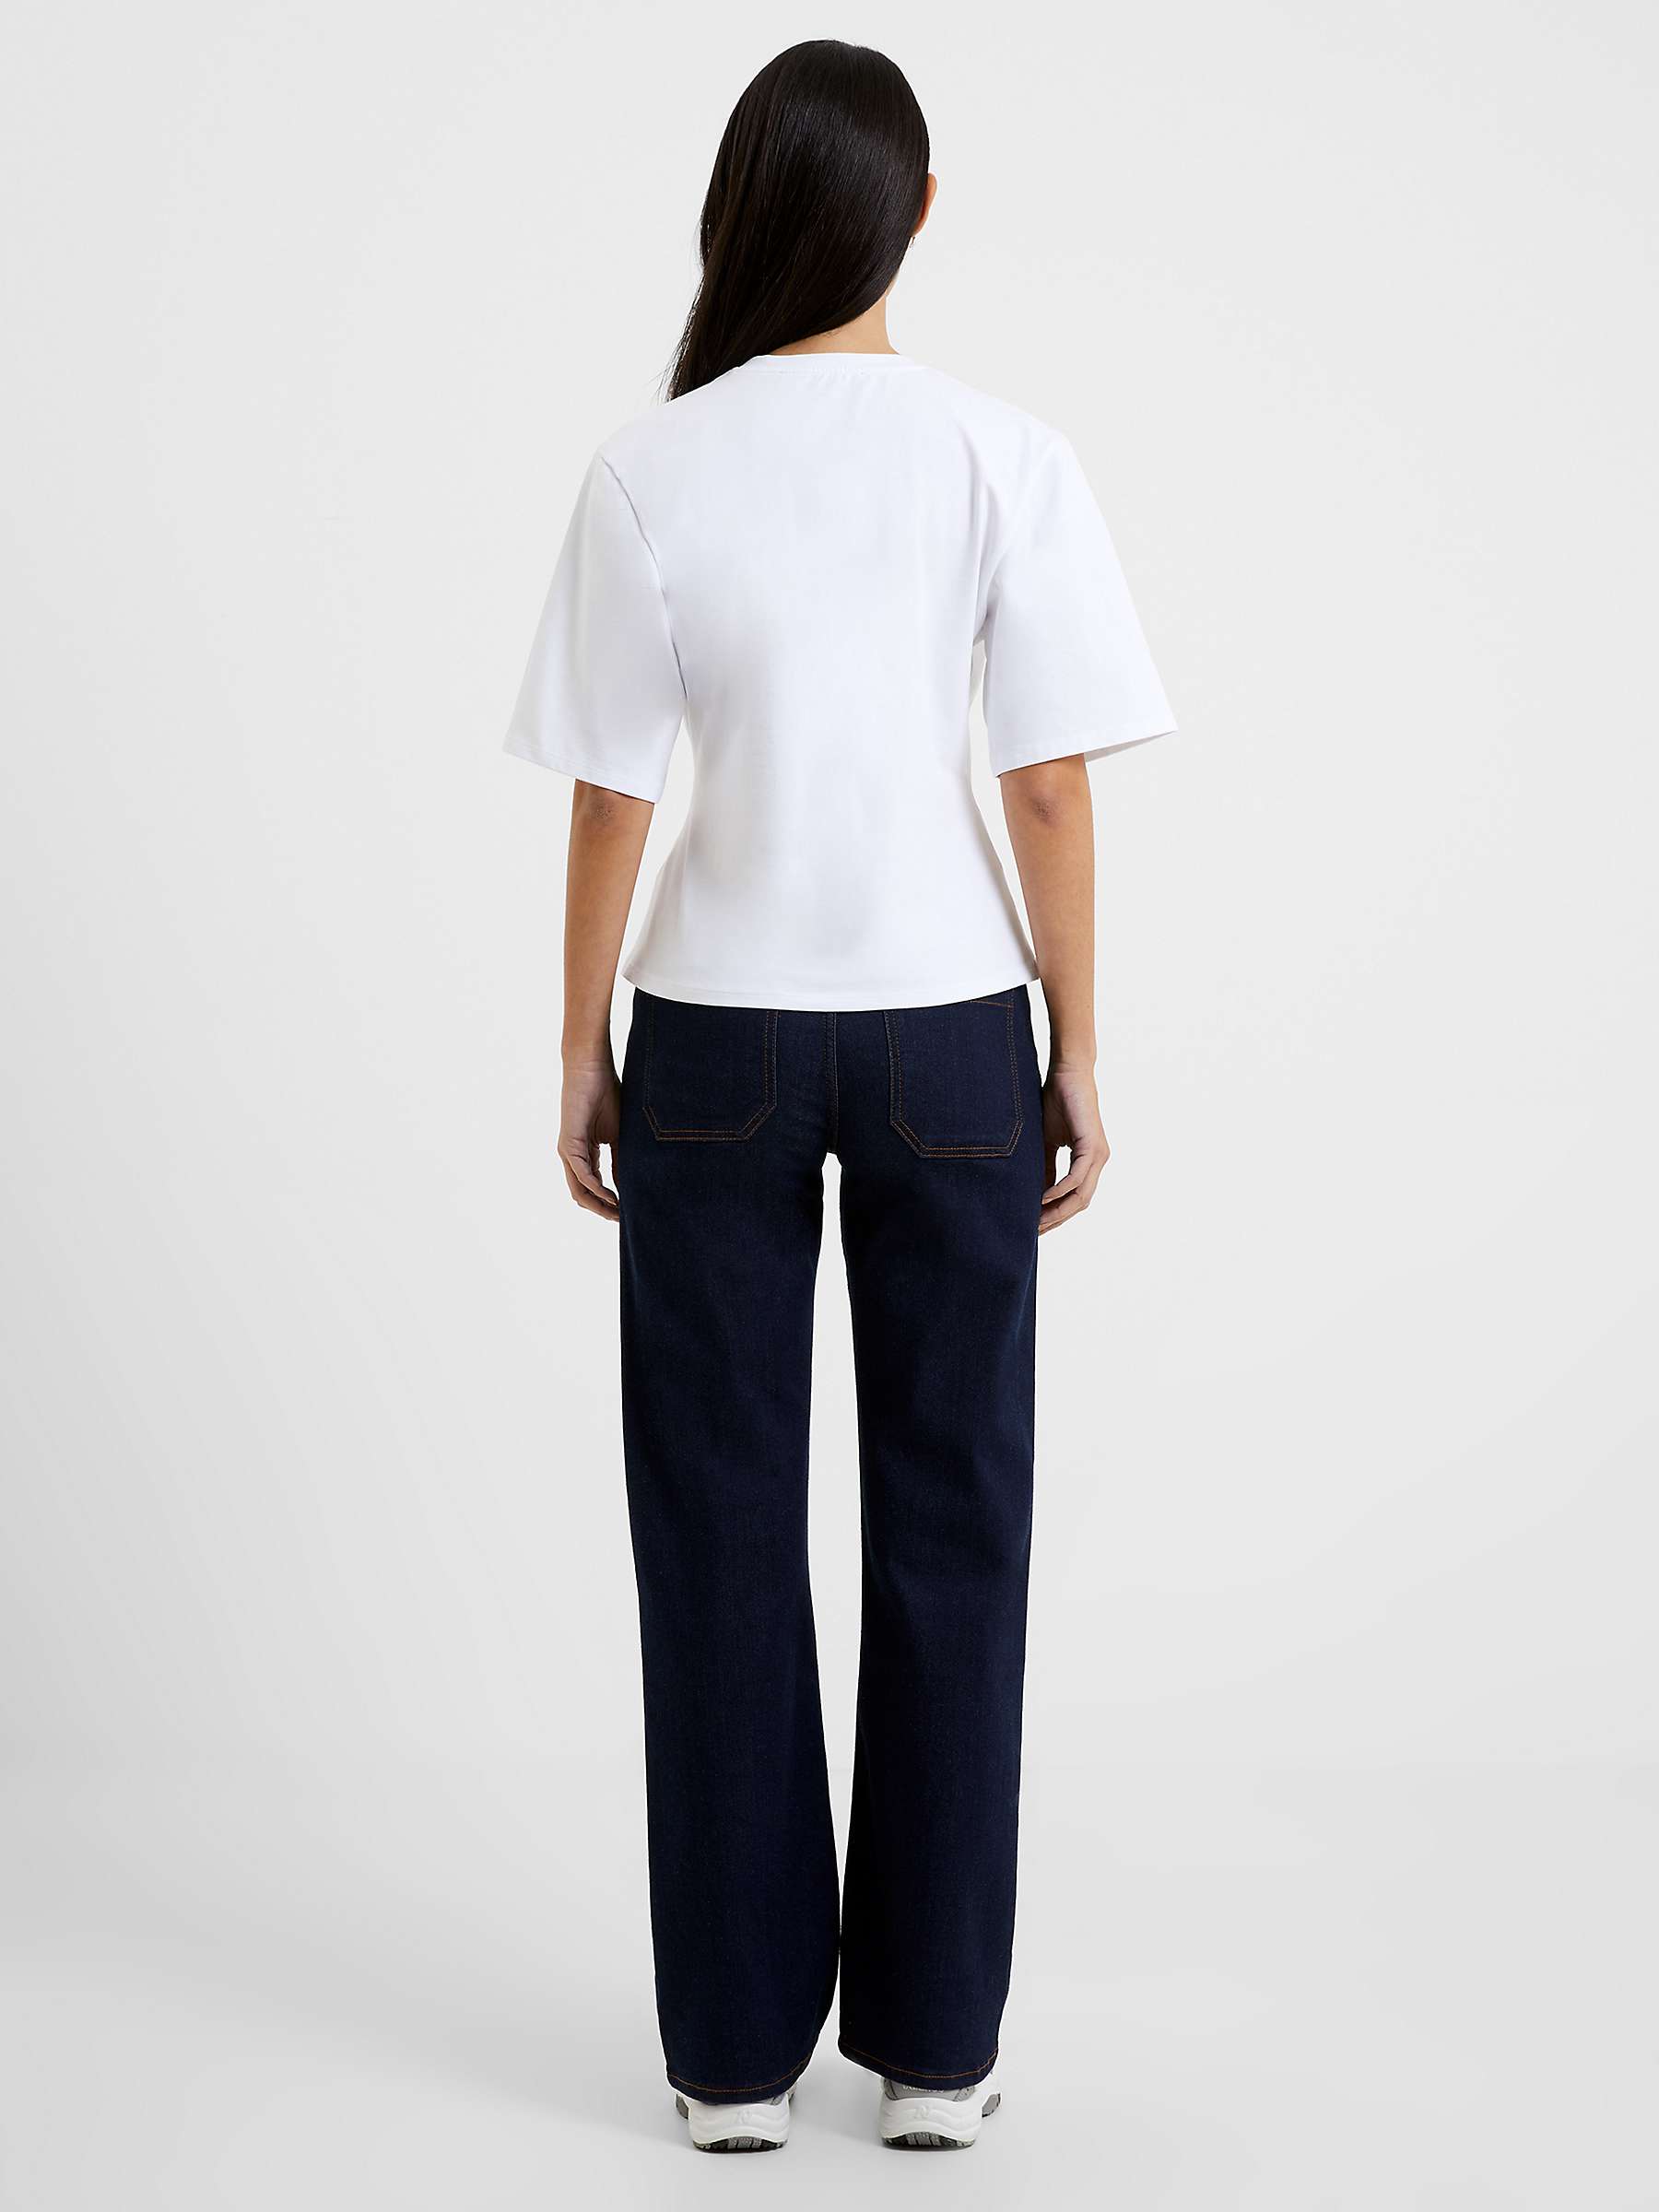 Buy French Connection Pearl Top Online at johnlewis.com